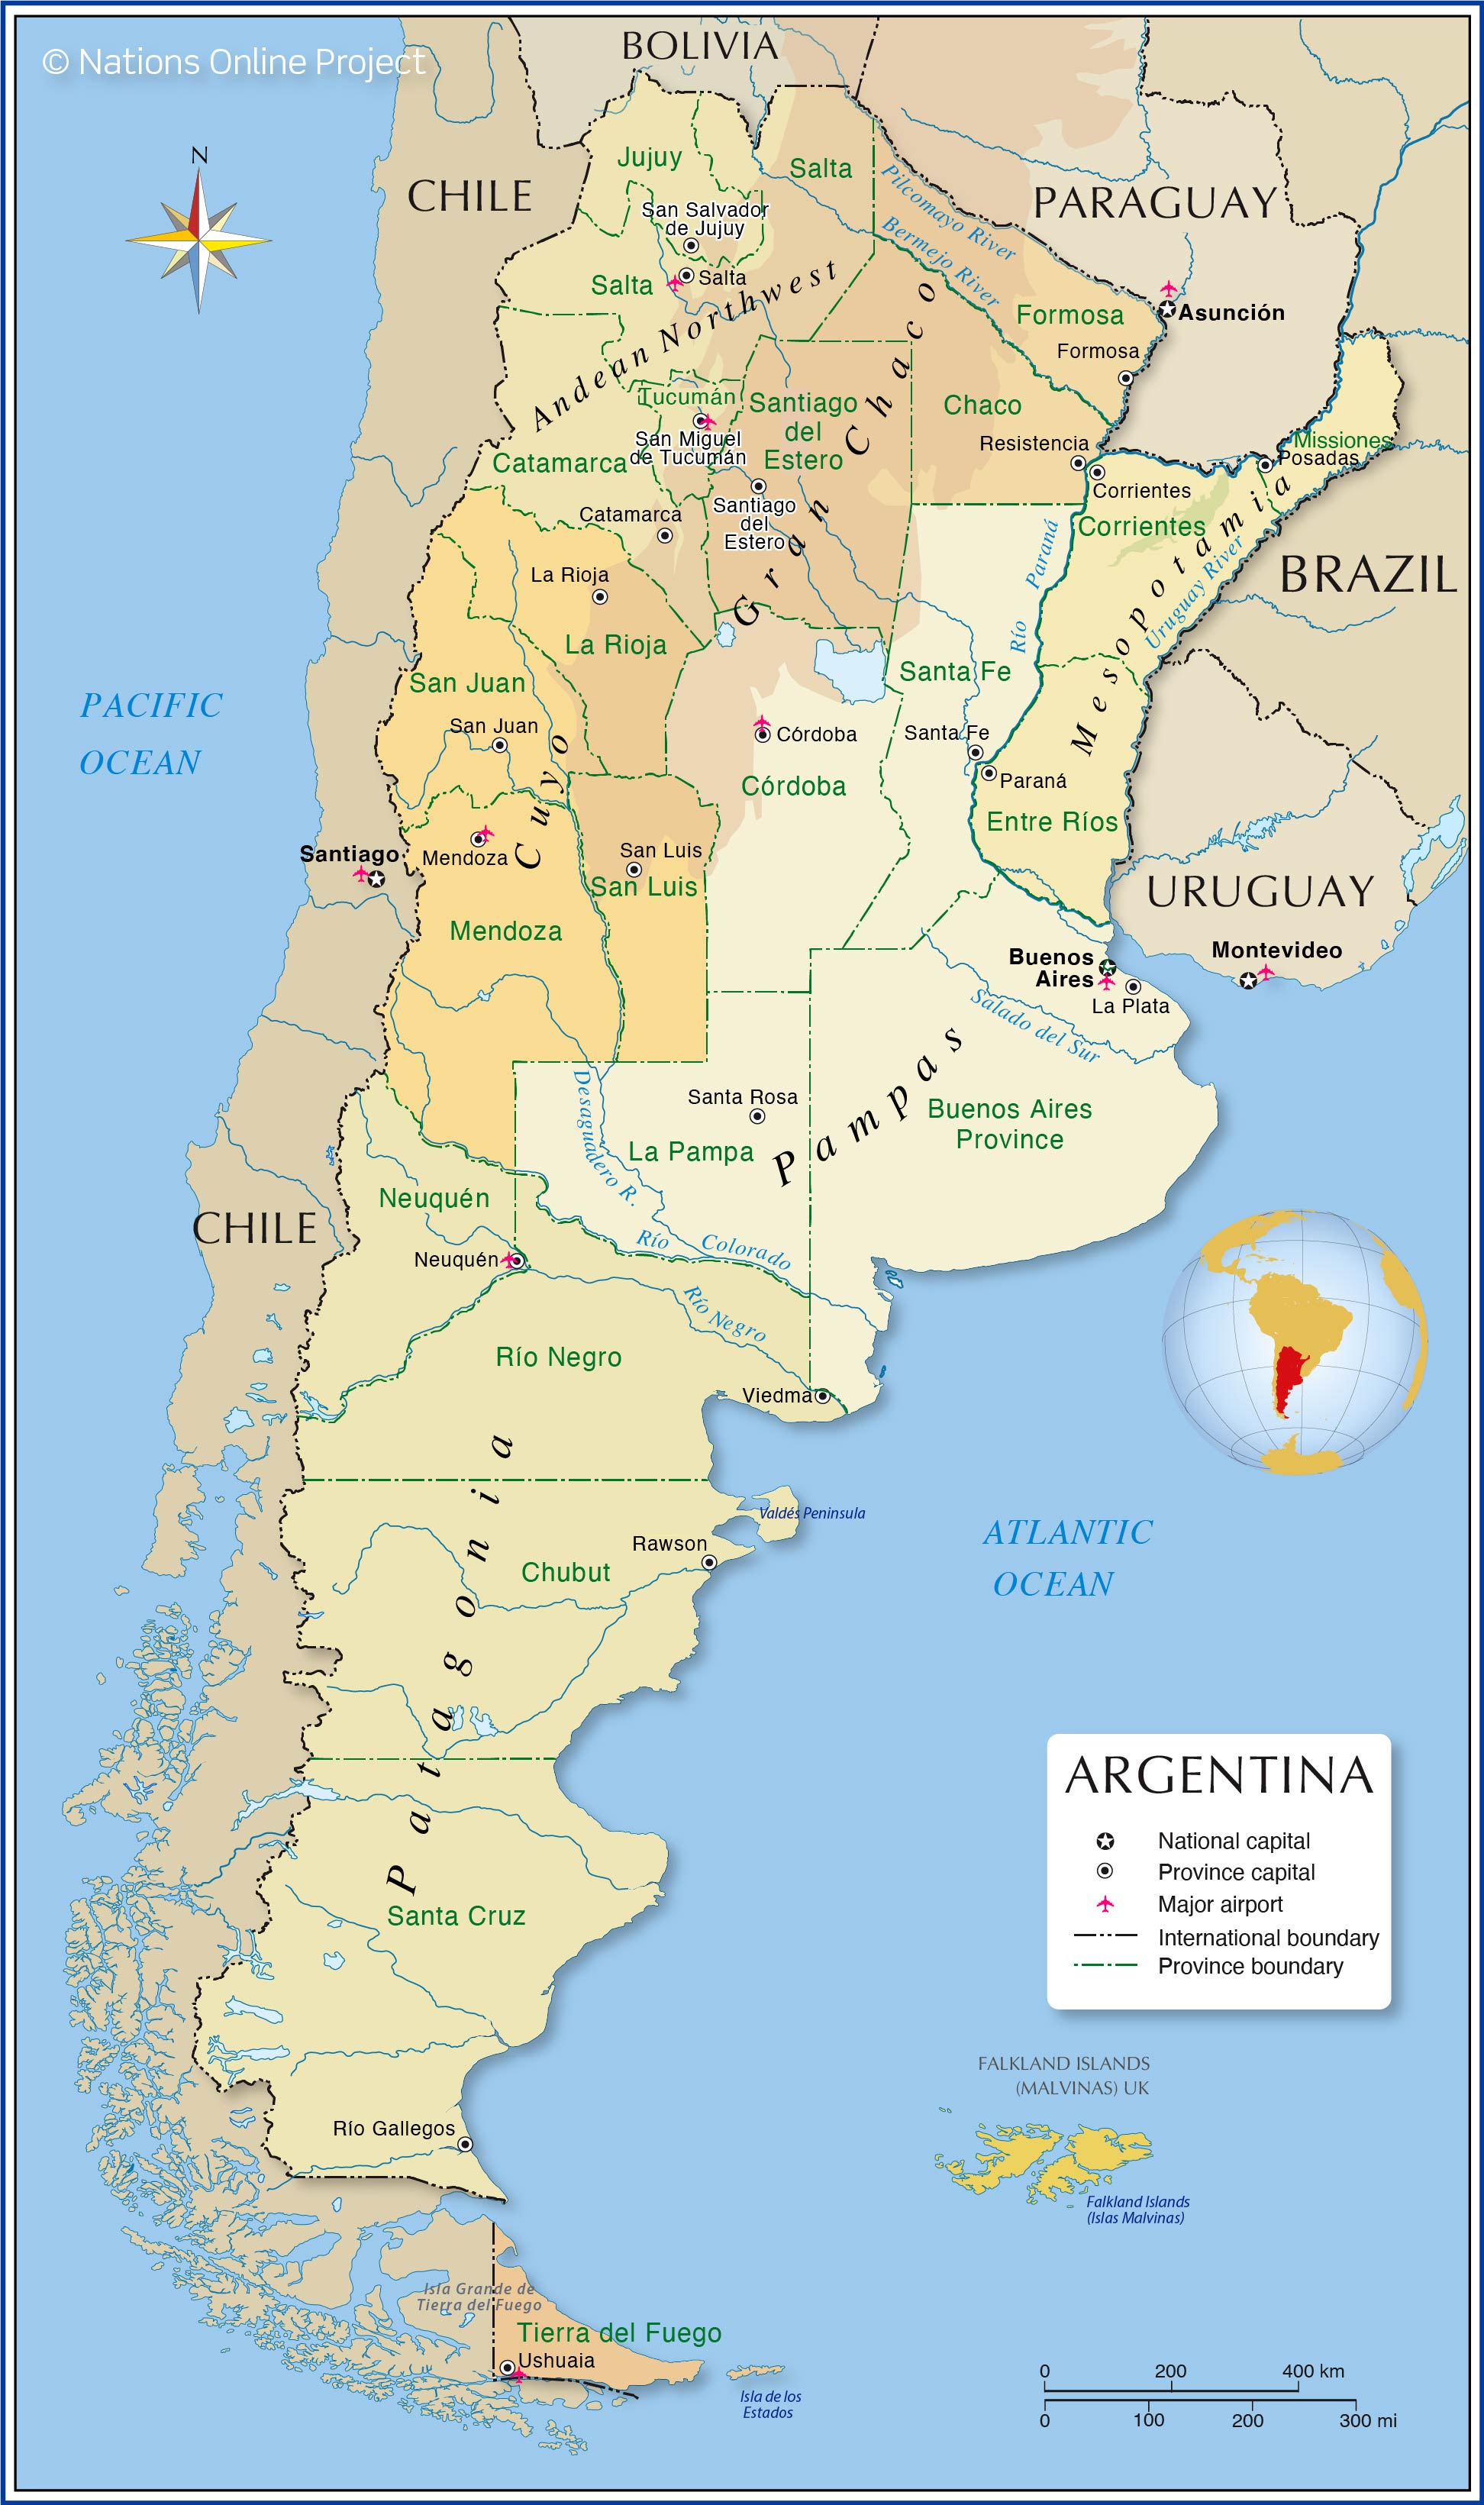 Administrative Map of Argentina - Nations Online Project